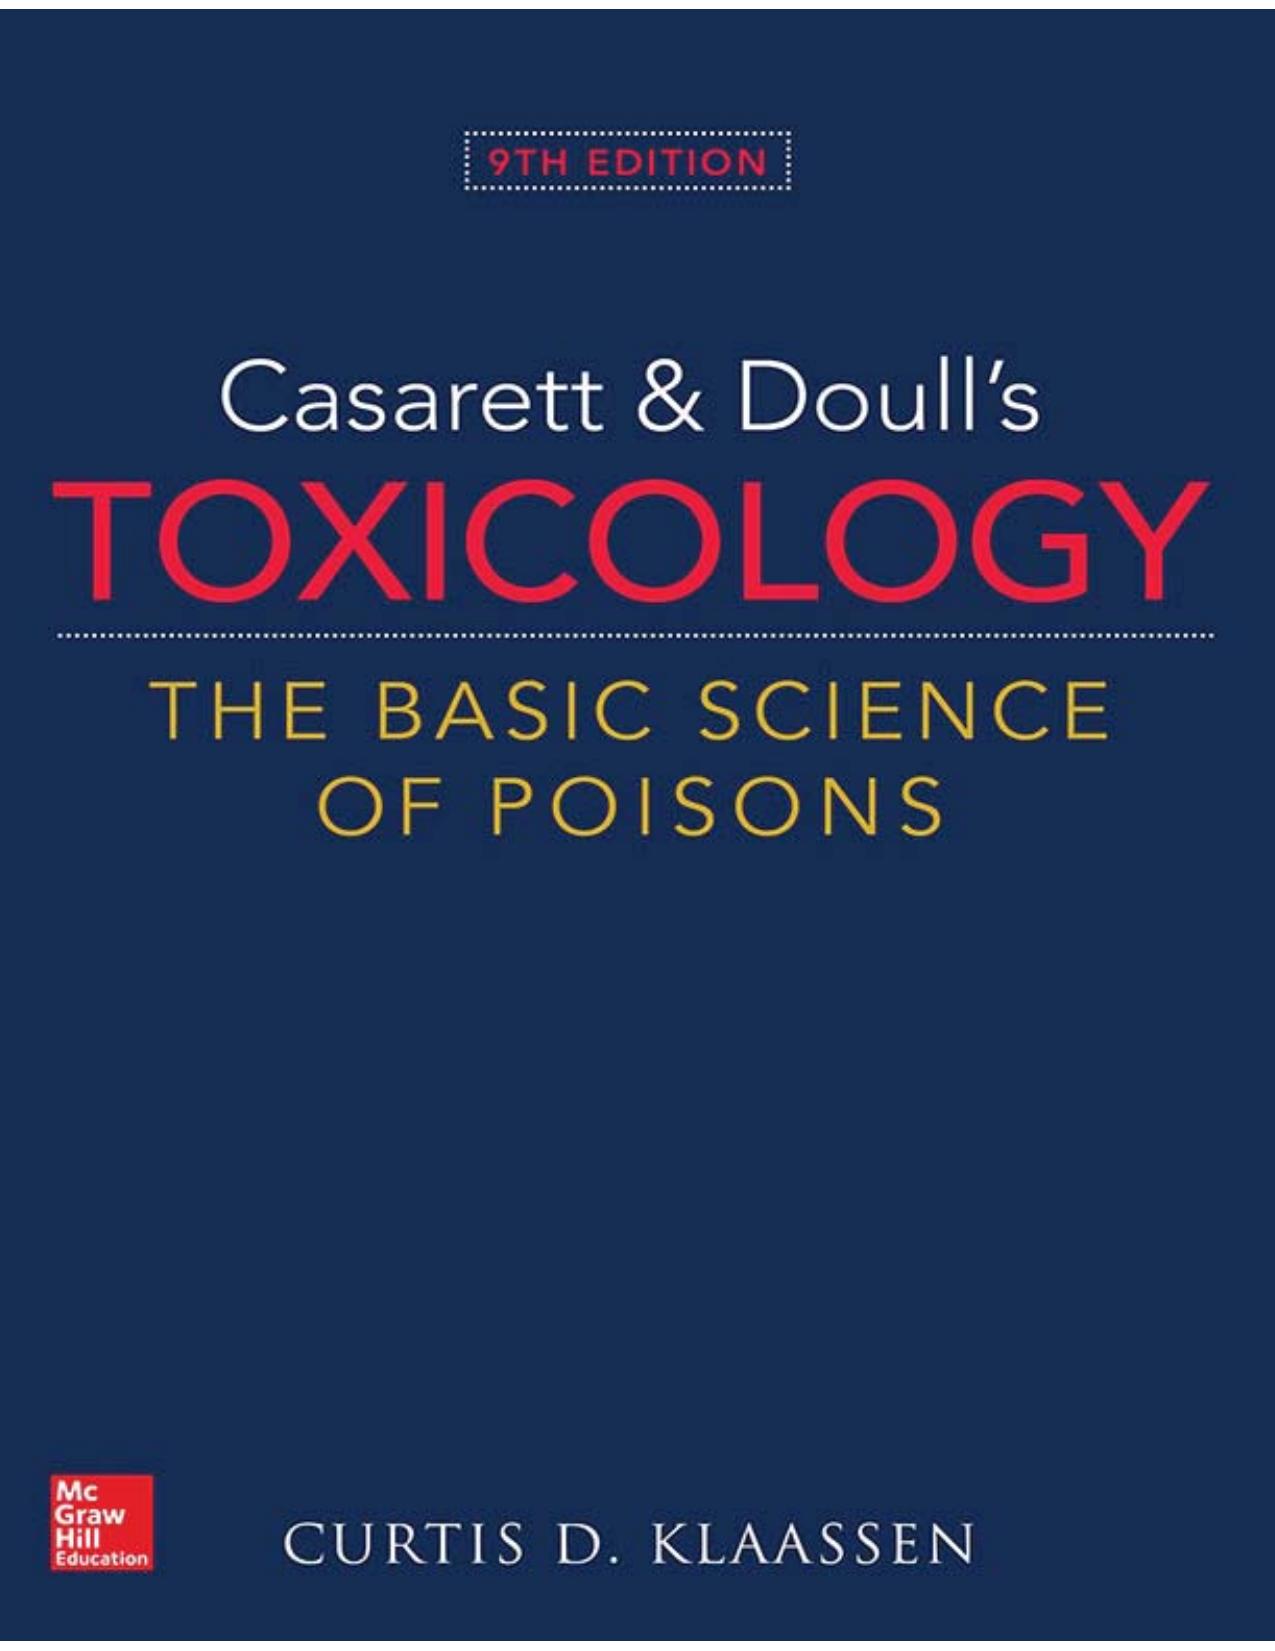 Casarett and Doull’s Toxicology: The Basic Science of Poisons, Ninth Edition